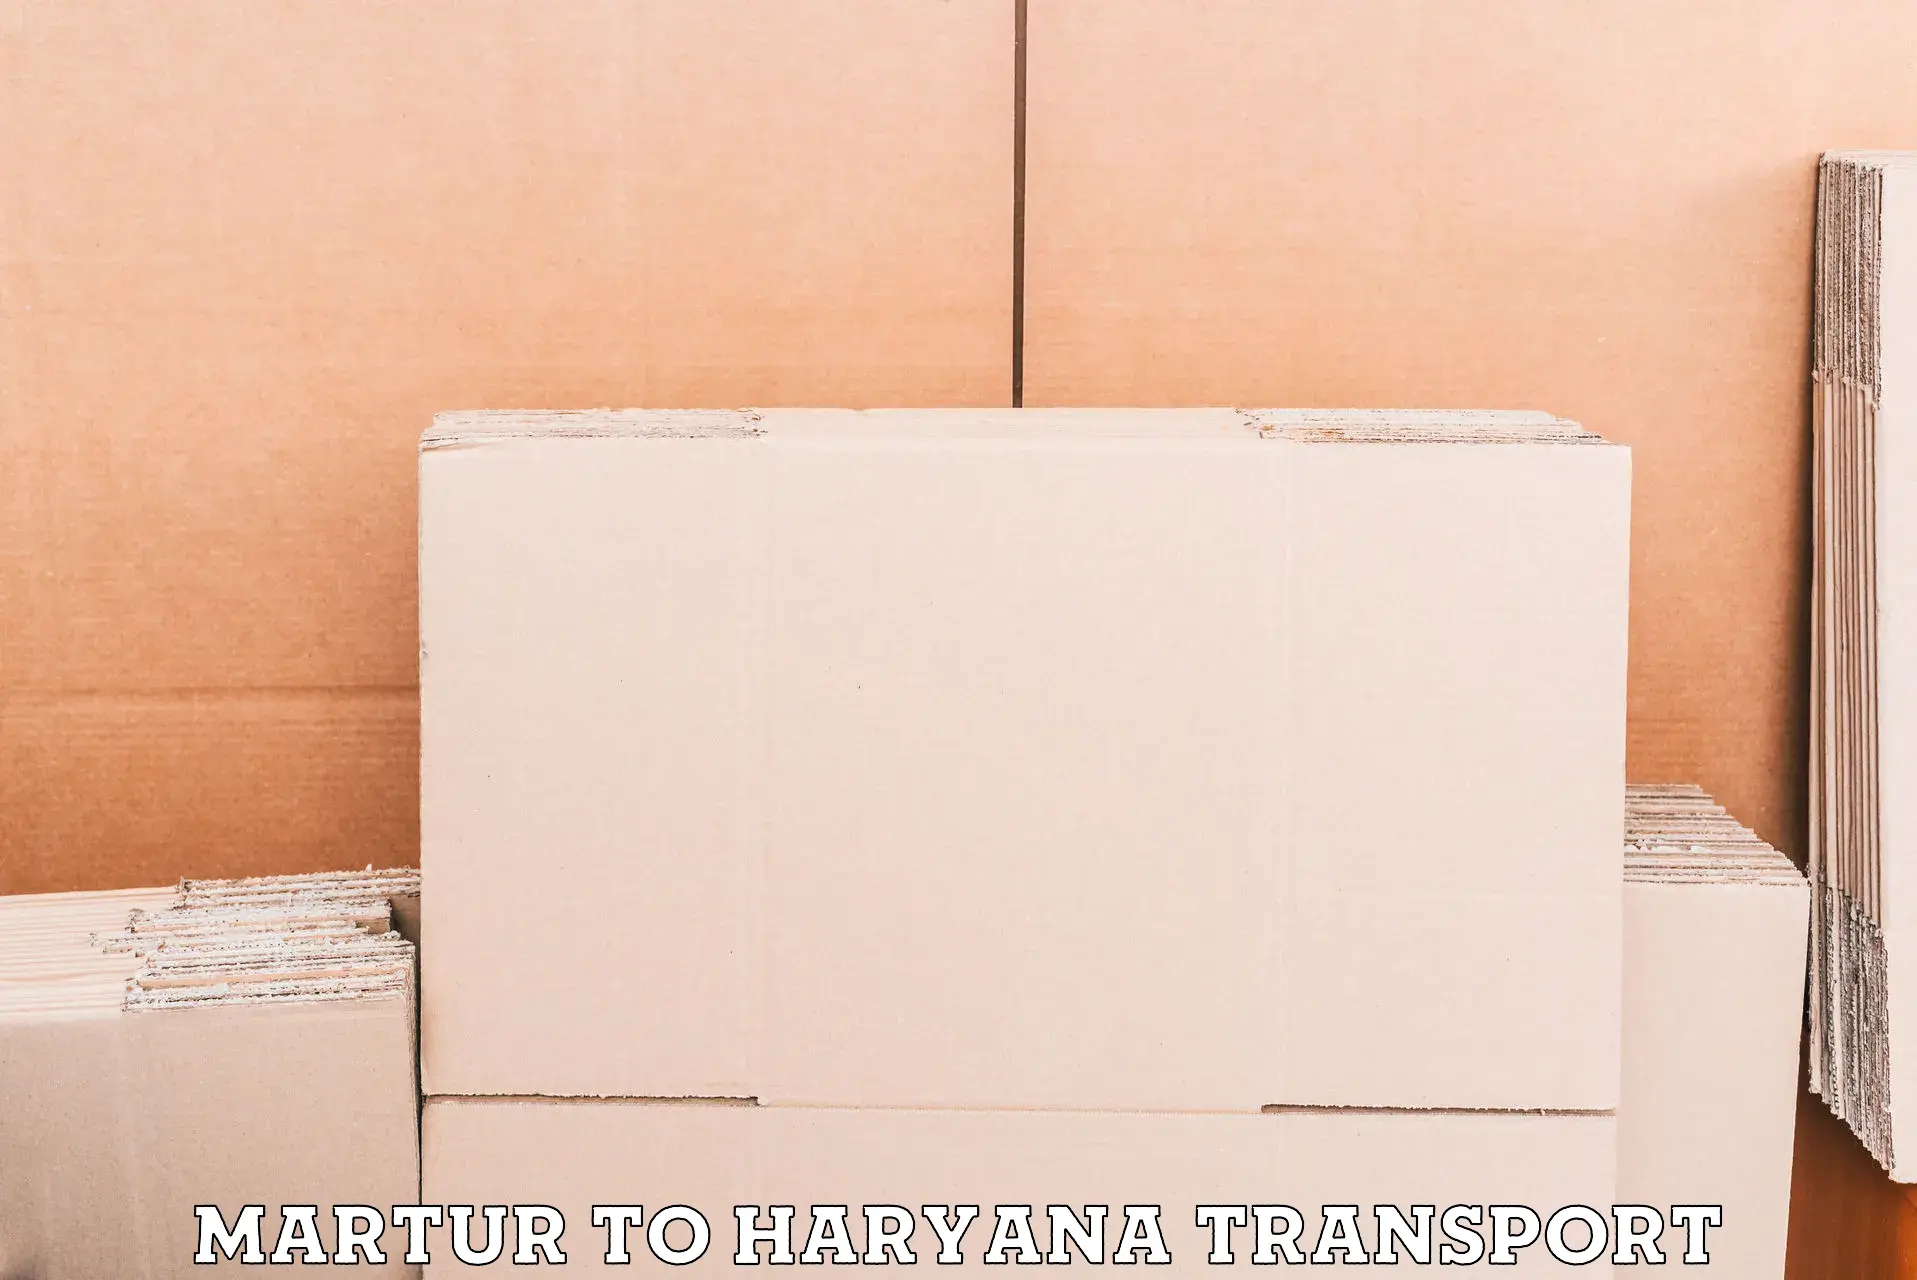 Vehicle transport services Martur to NCR Haryana